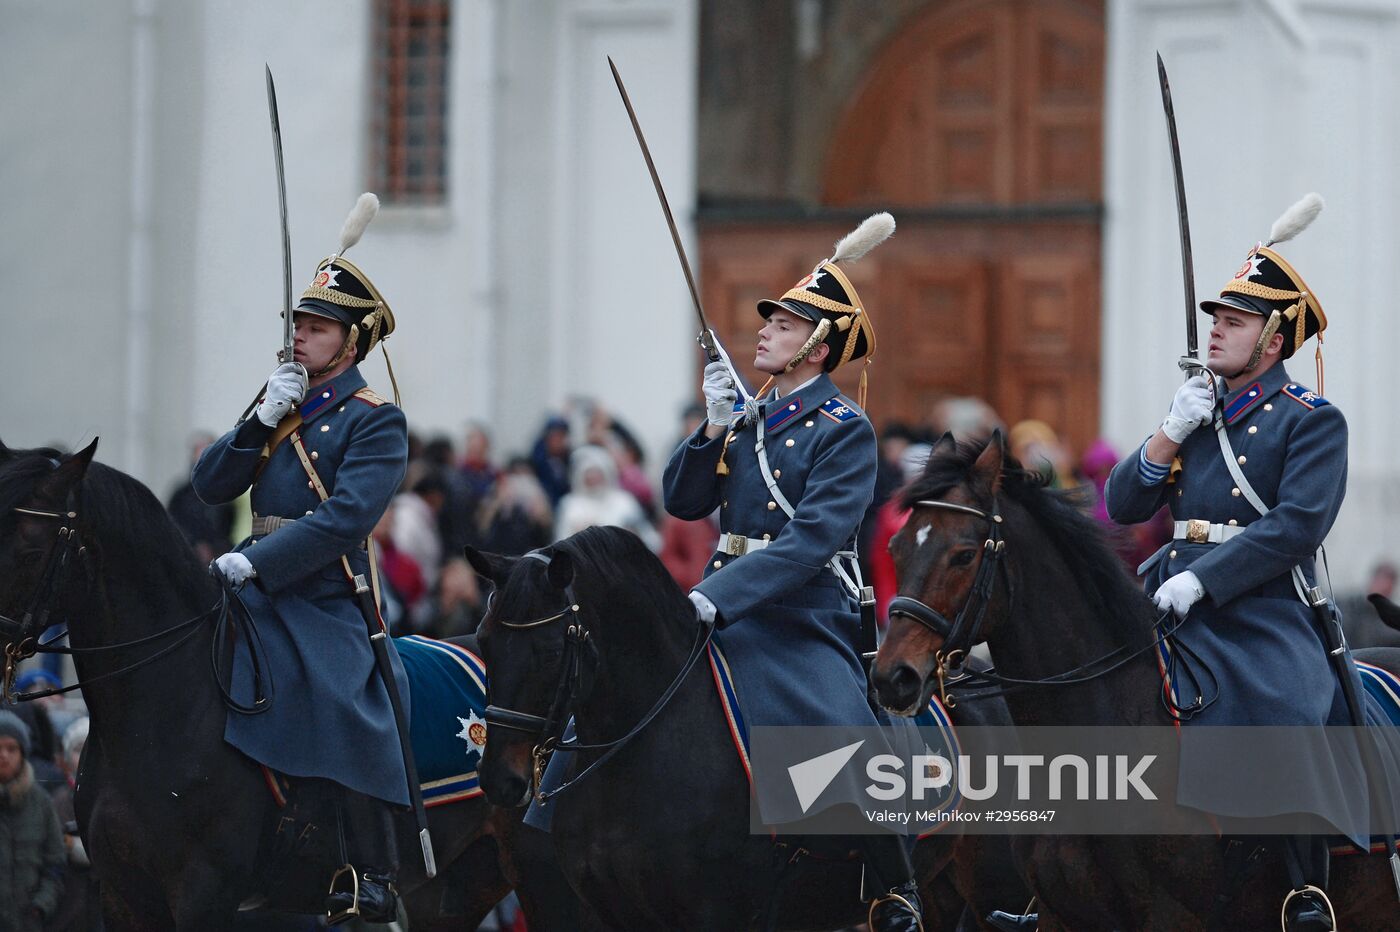 The year's last guard mounting ceremony of dismounted and cavalry guards